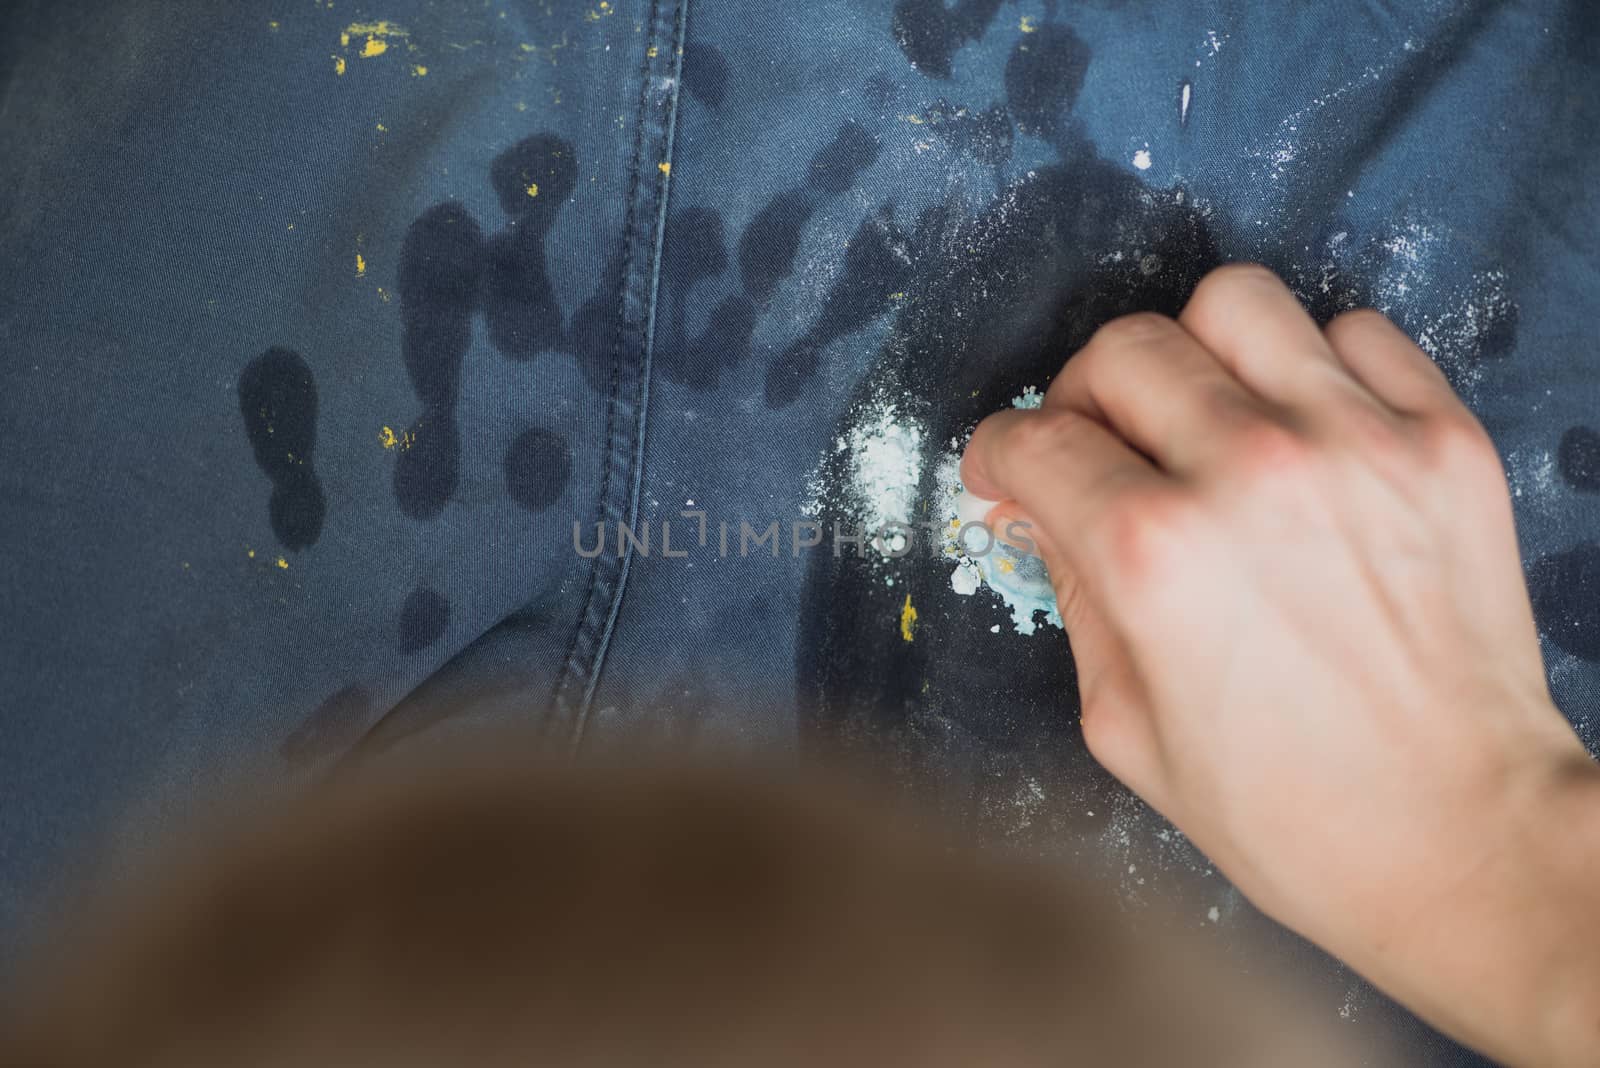 boy wipes the paint on his pants. Blue Jeans and sneakers stained with yellow paint. Top view. by skrotov